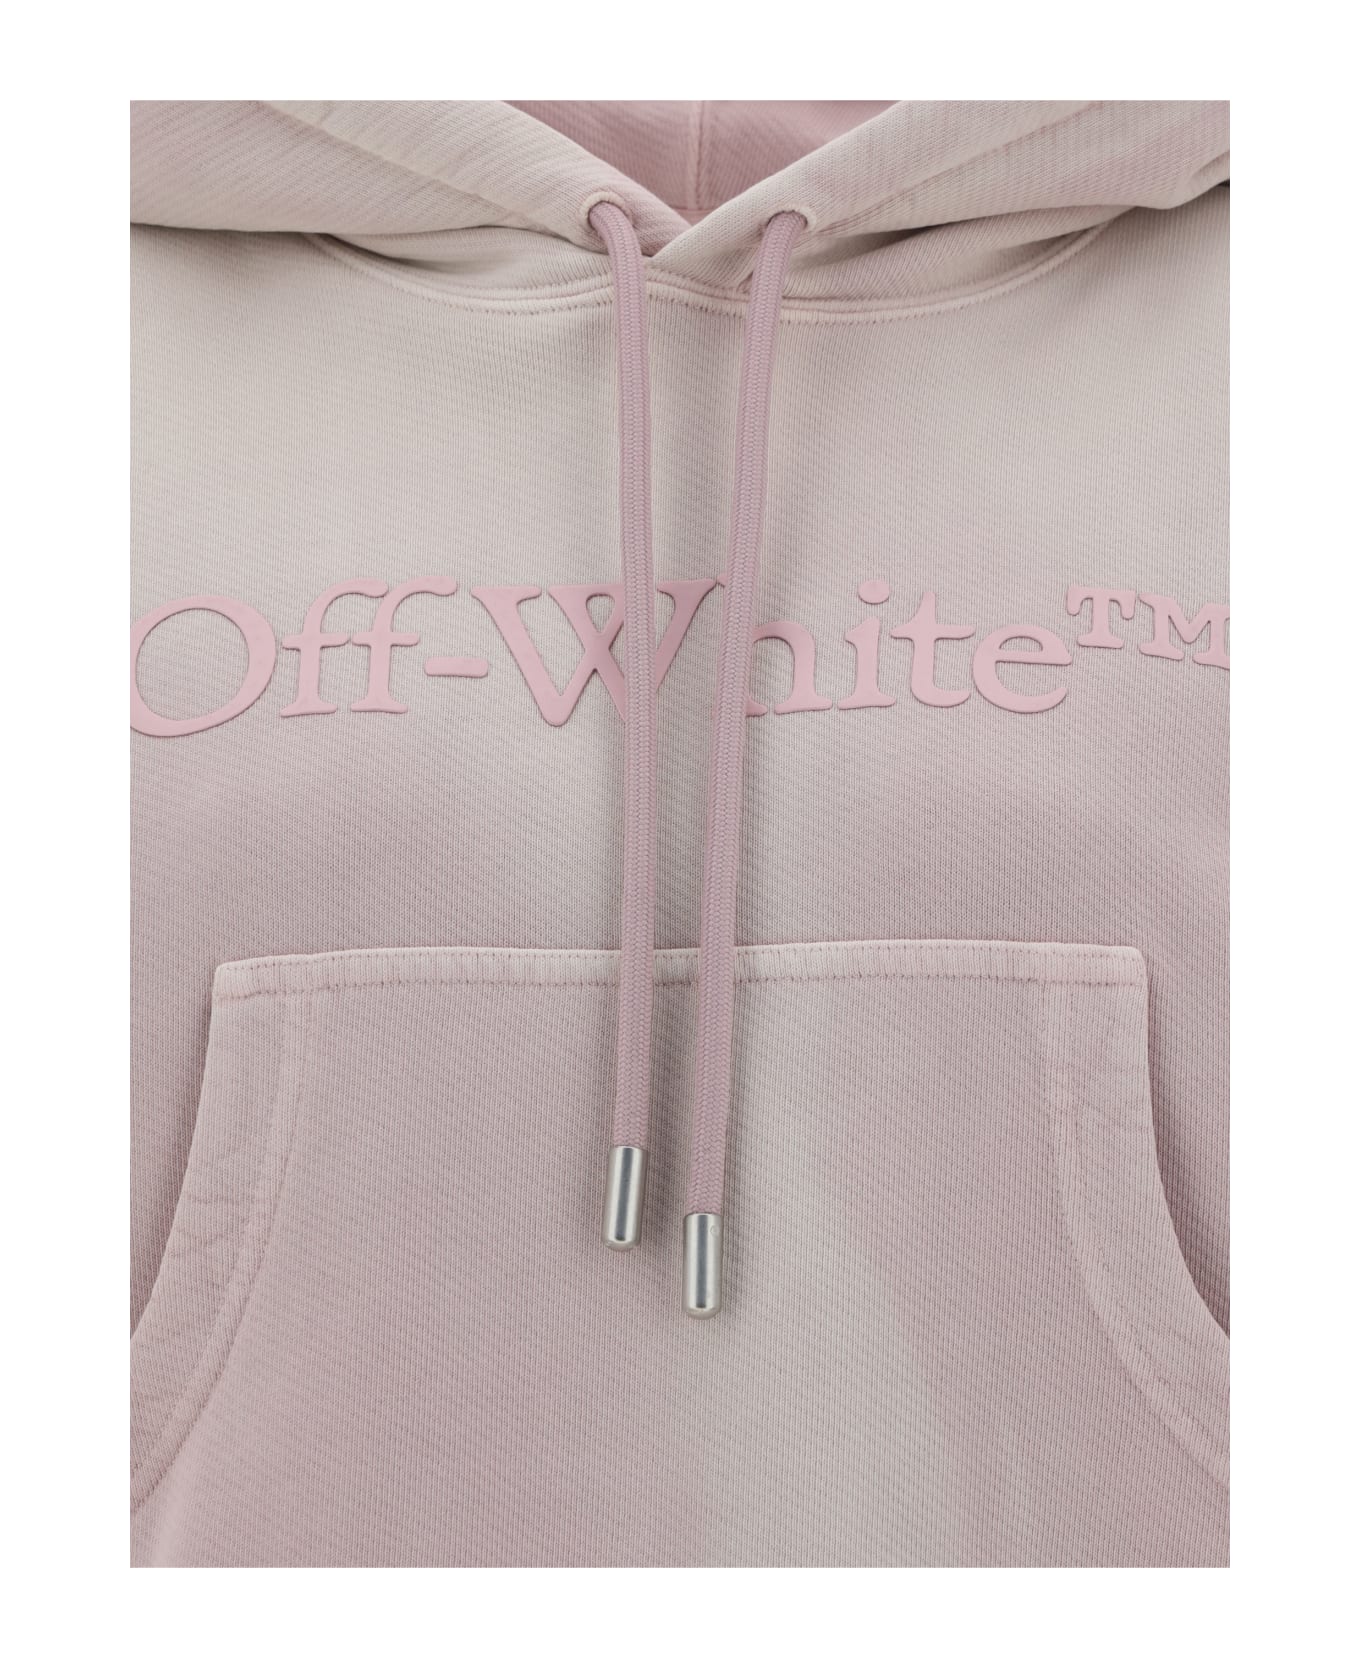 Off-White Laundry Over Hoodie - Burnished Lilac Burnished Lilac フリース